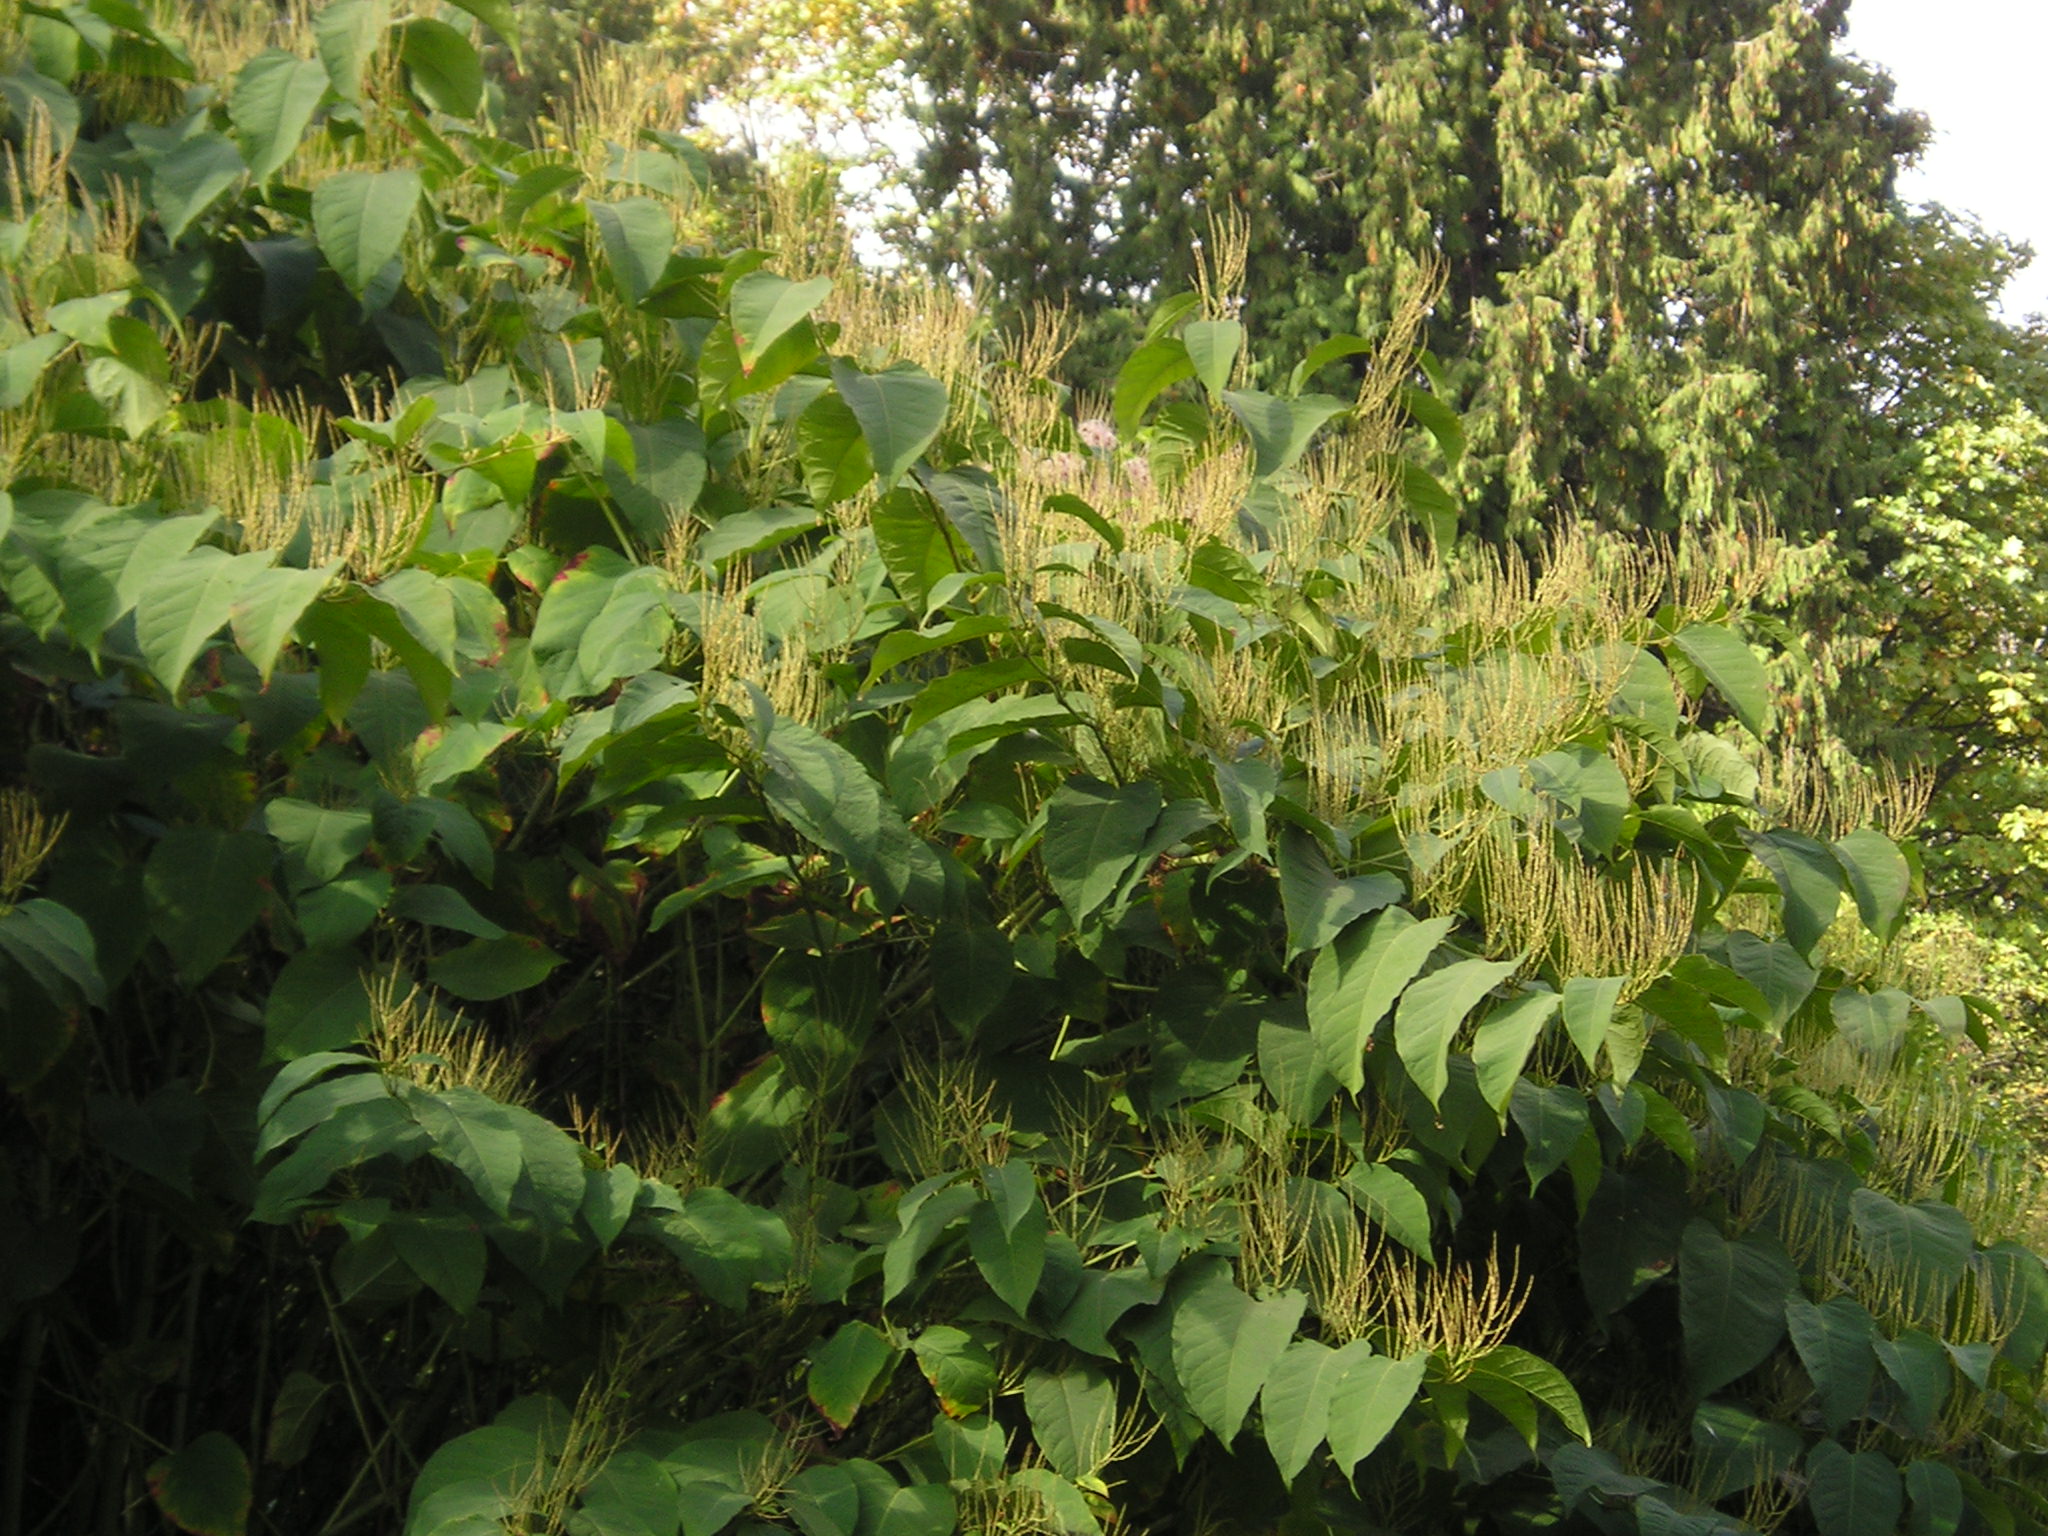 Bohemian knotweed stand in fall